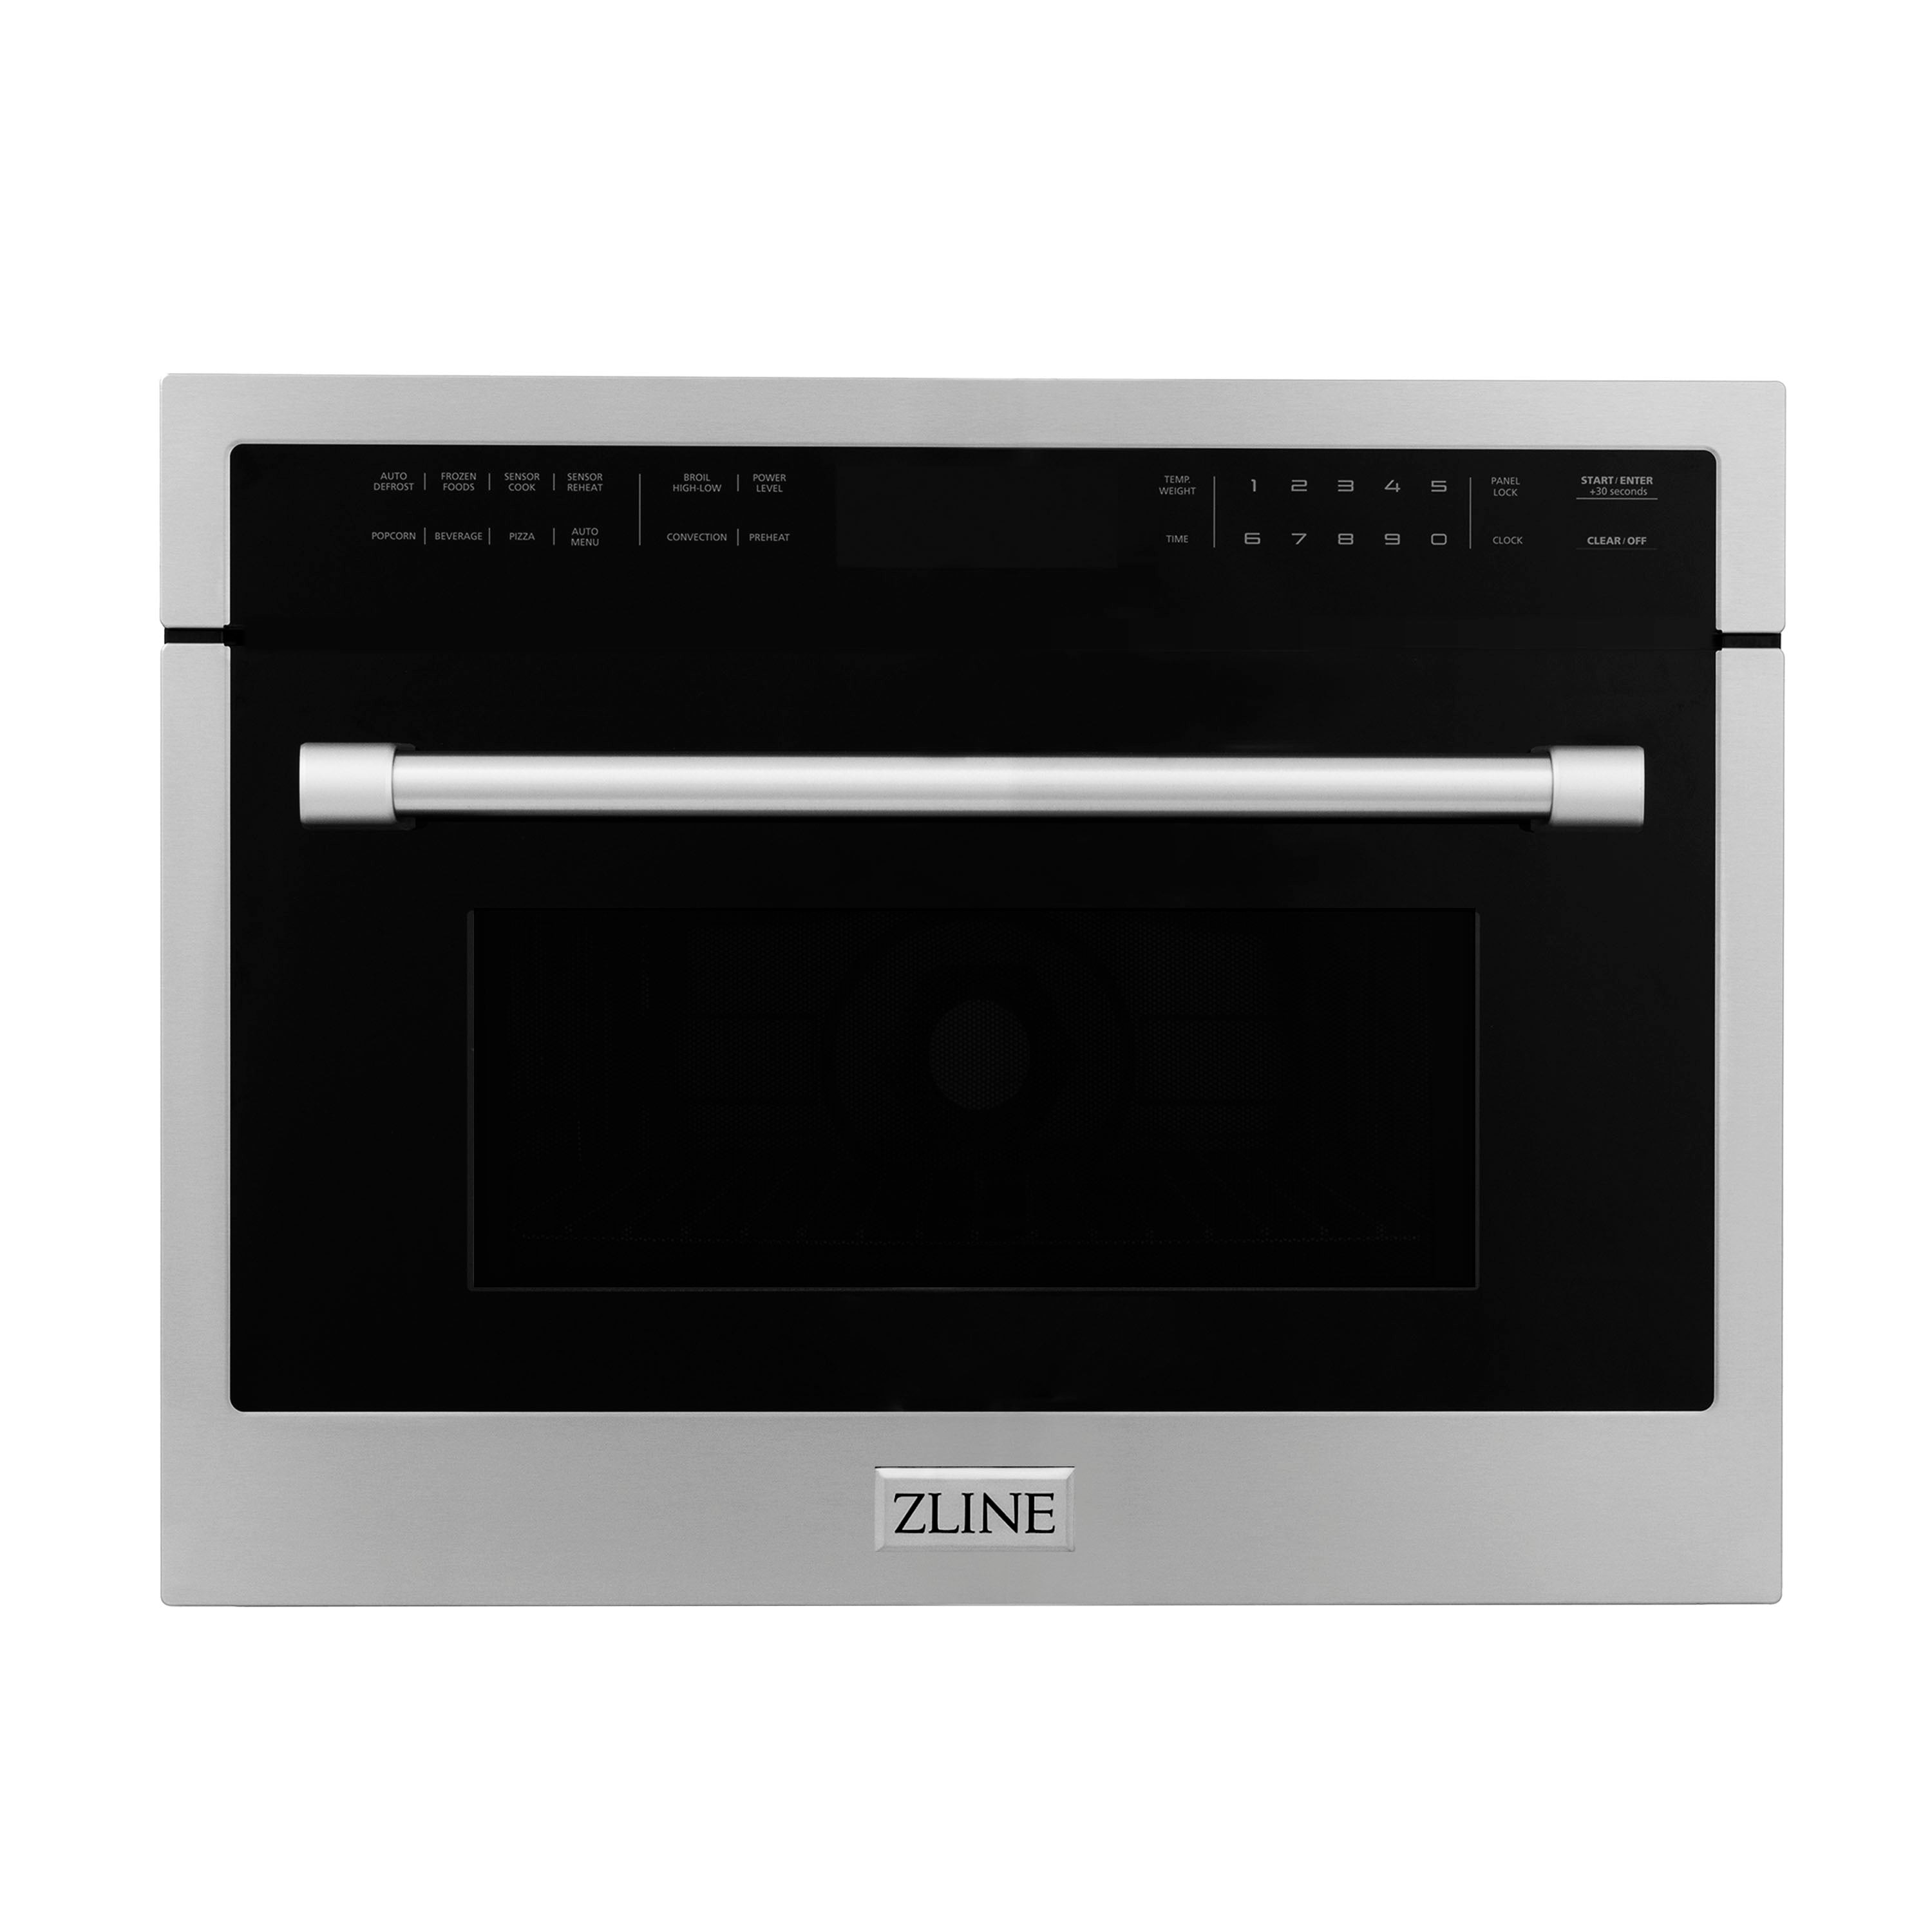 Zline Kitchen and Bath ZLINE 24" Built-in Convection Microwave Oven in Stainless Steel